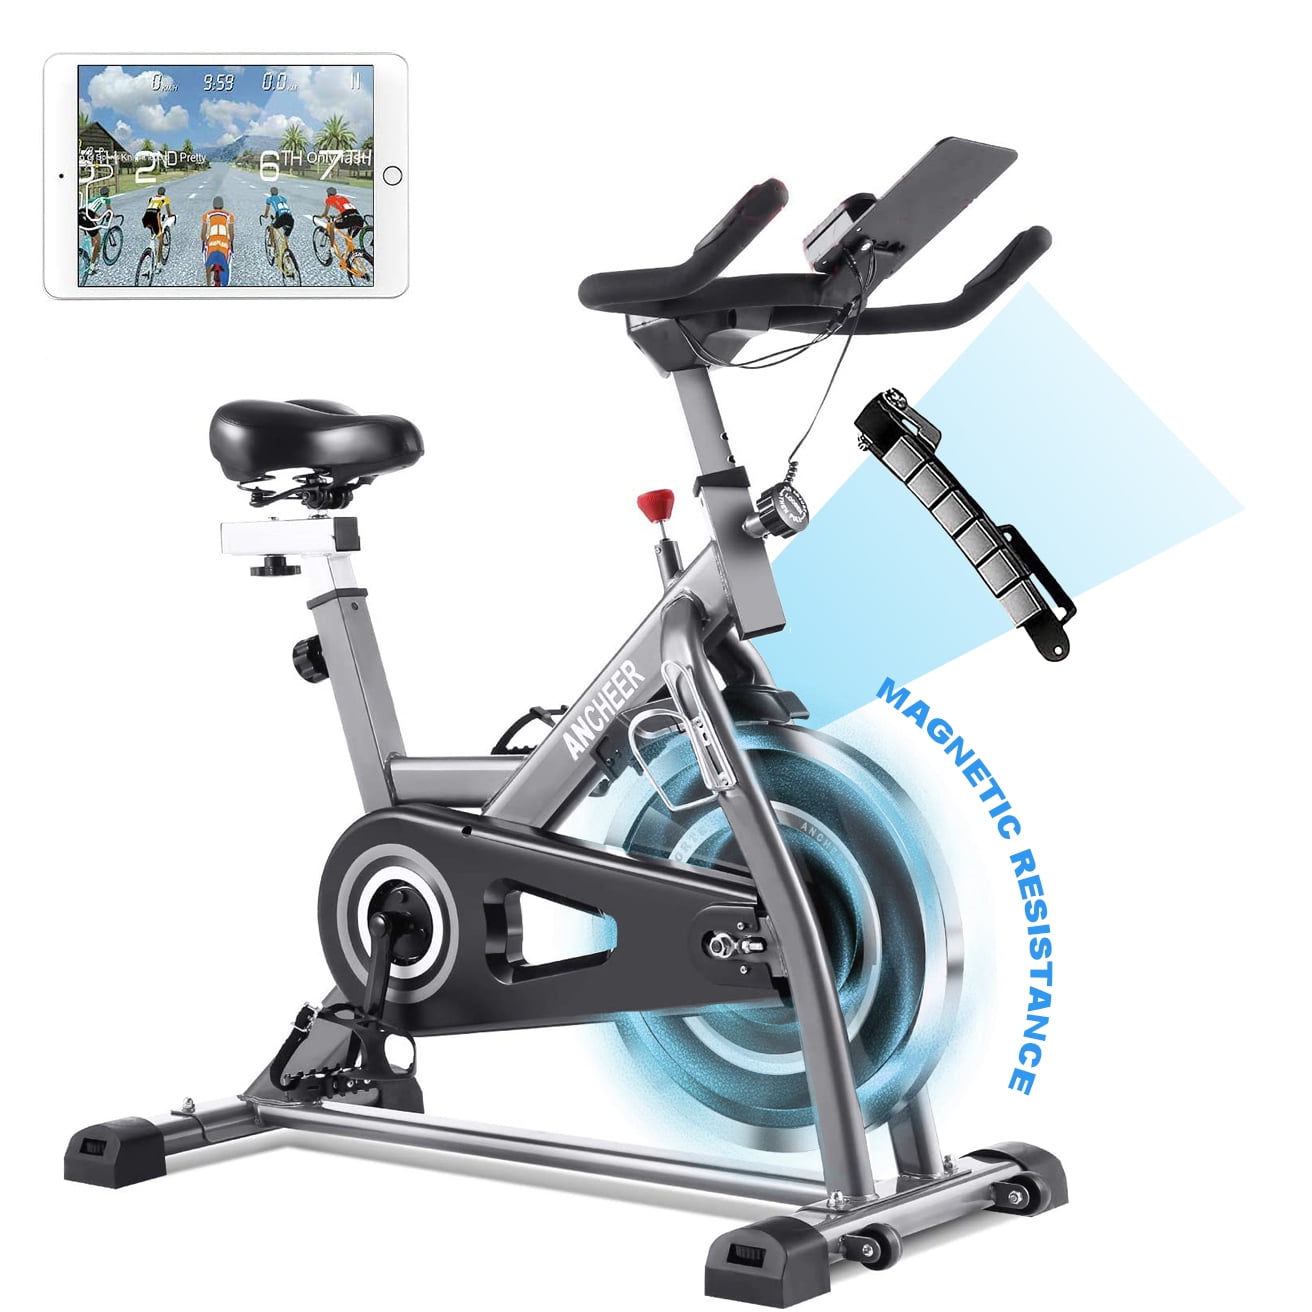 Details about   Stationary Exercise Bike Cycling Bikes with Heart Rate LED Monitor 330 Lbs Load* 